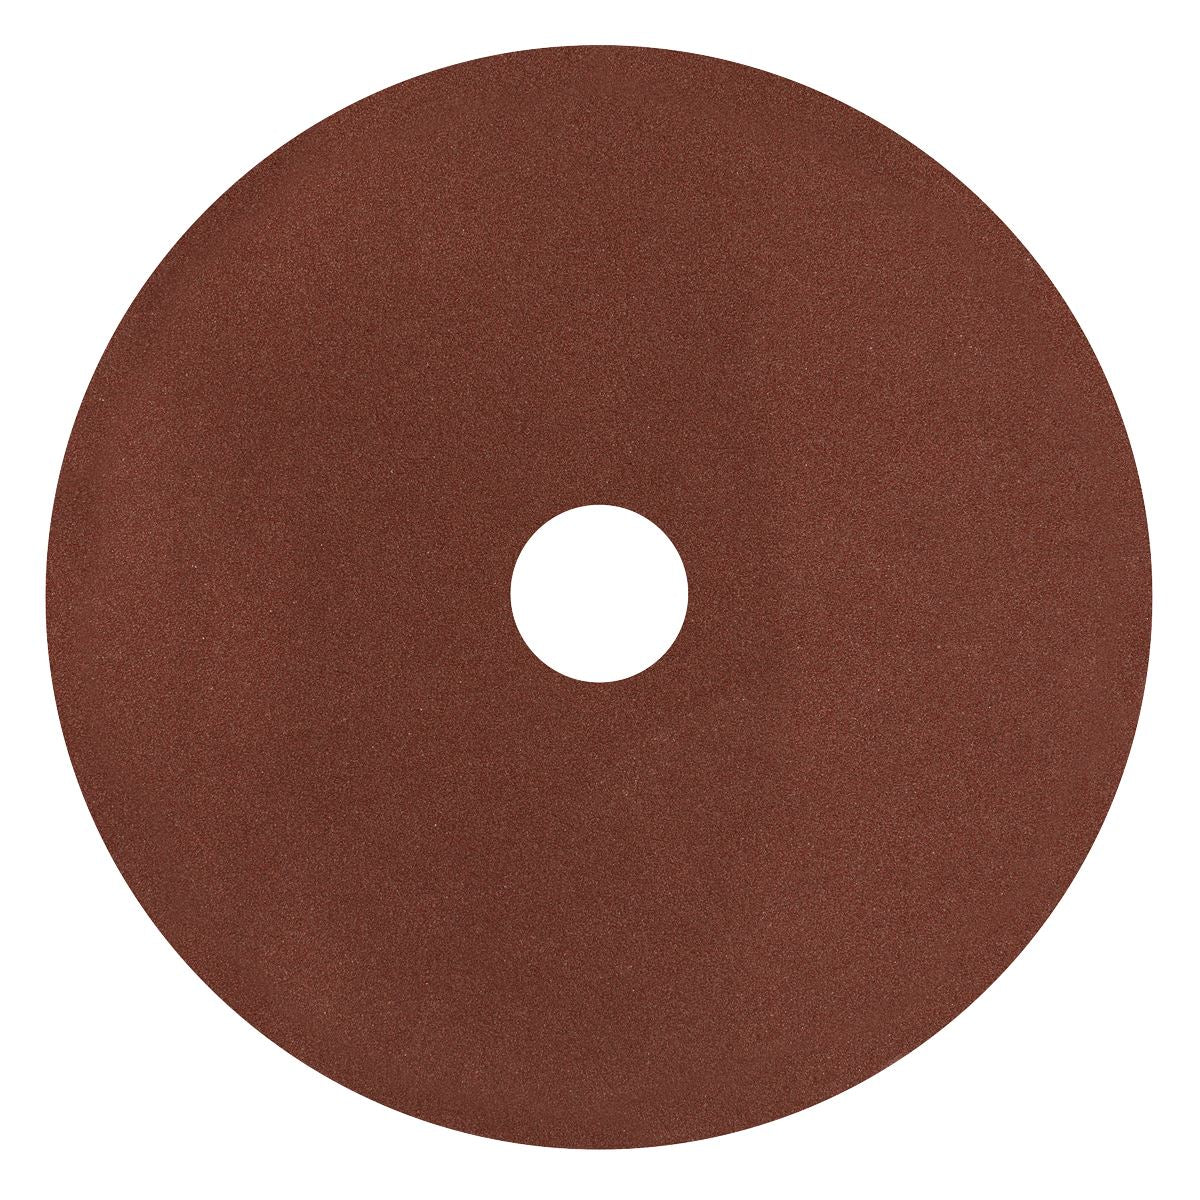 Worksafe by Sealey Fibre Backed Disc Ø115mm - 80Grit Pack of 25